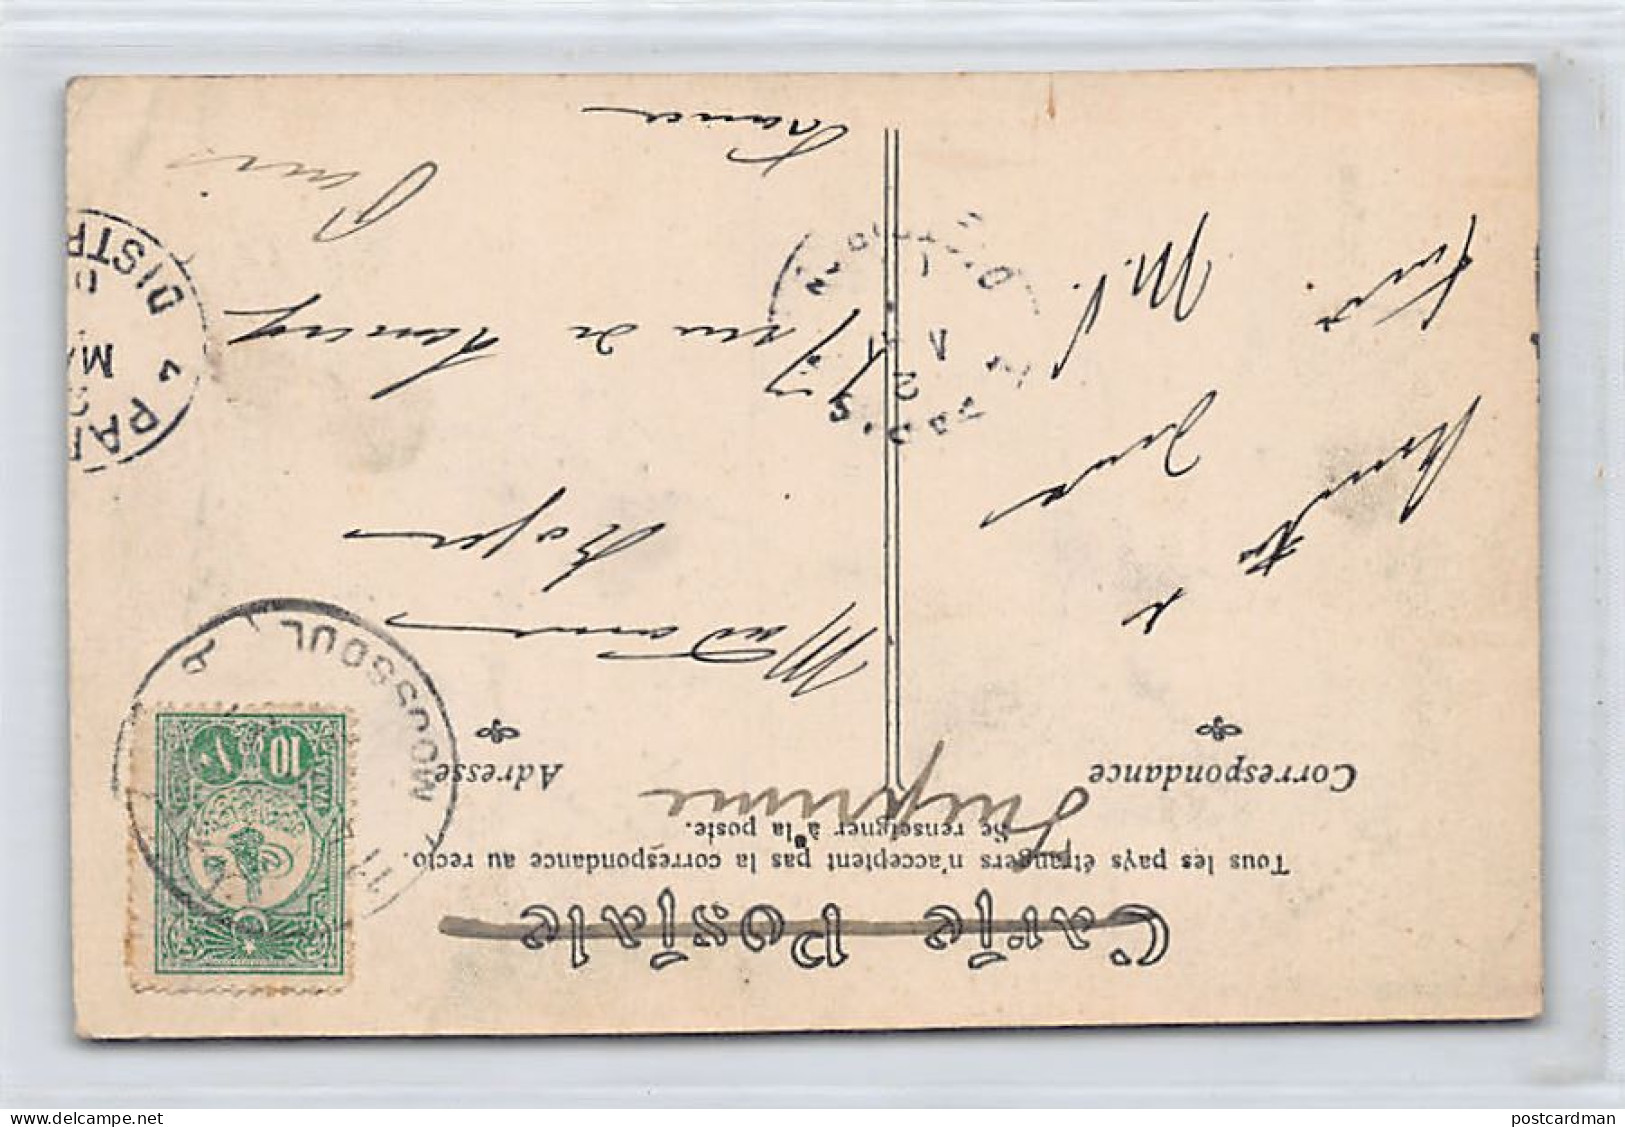 Iraq - MOSUL - The Tigris River - SEE STAMP AND POSTMARK - Publ. Unknown  - Iraq